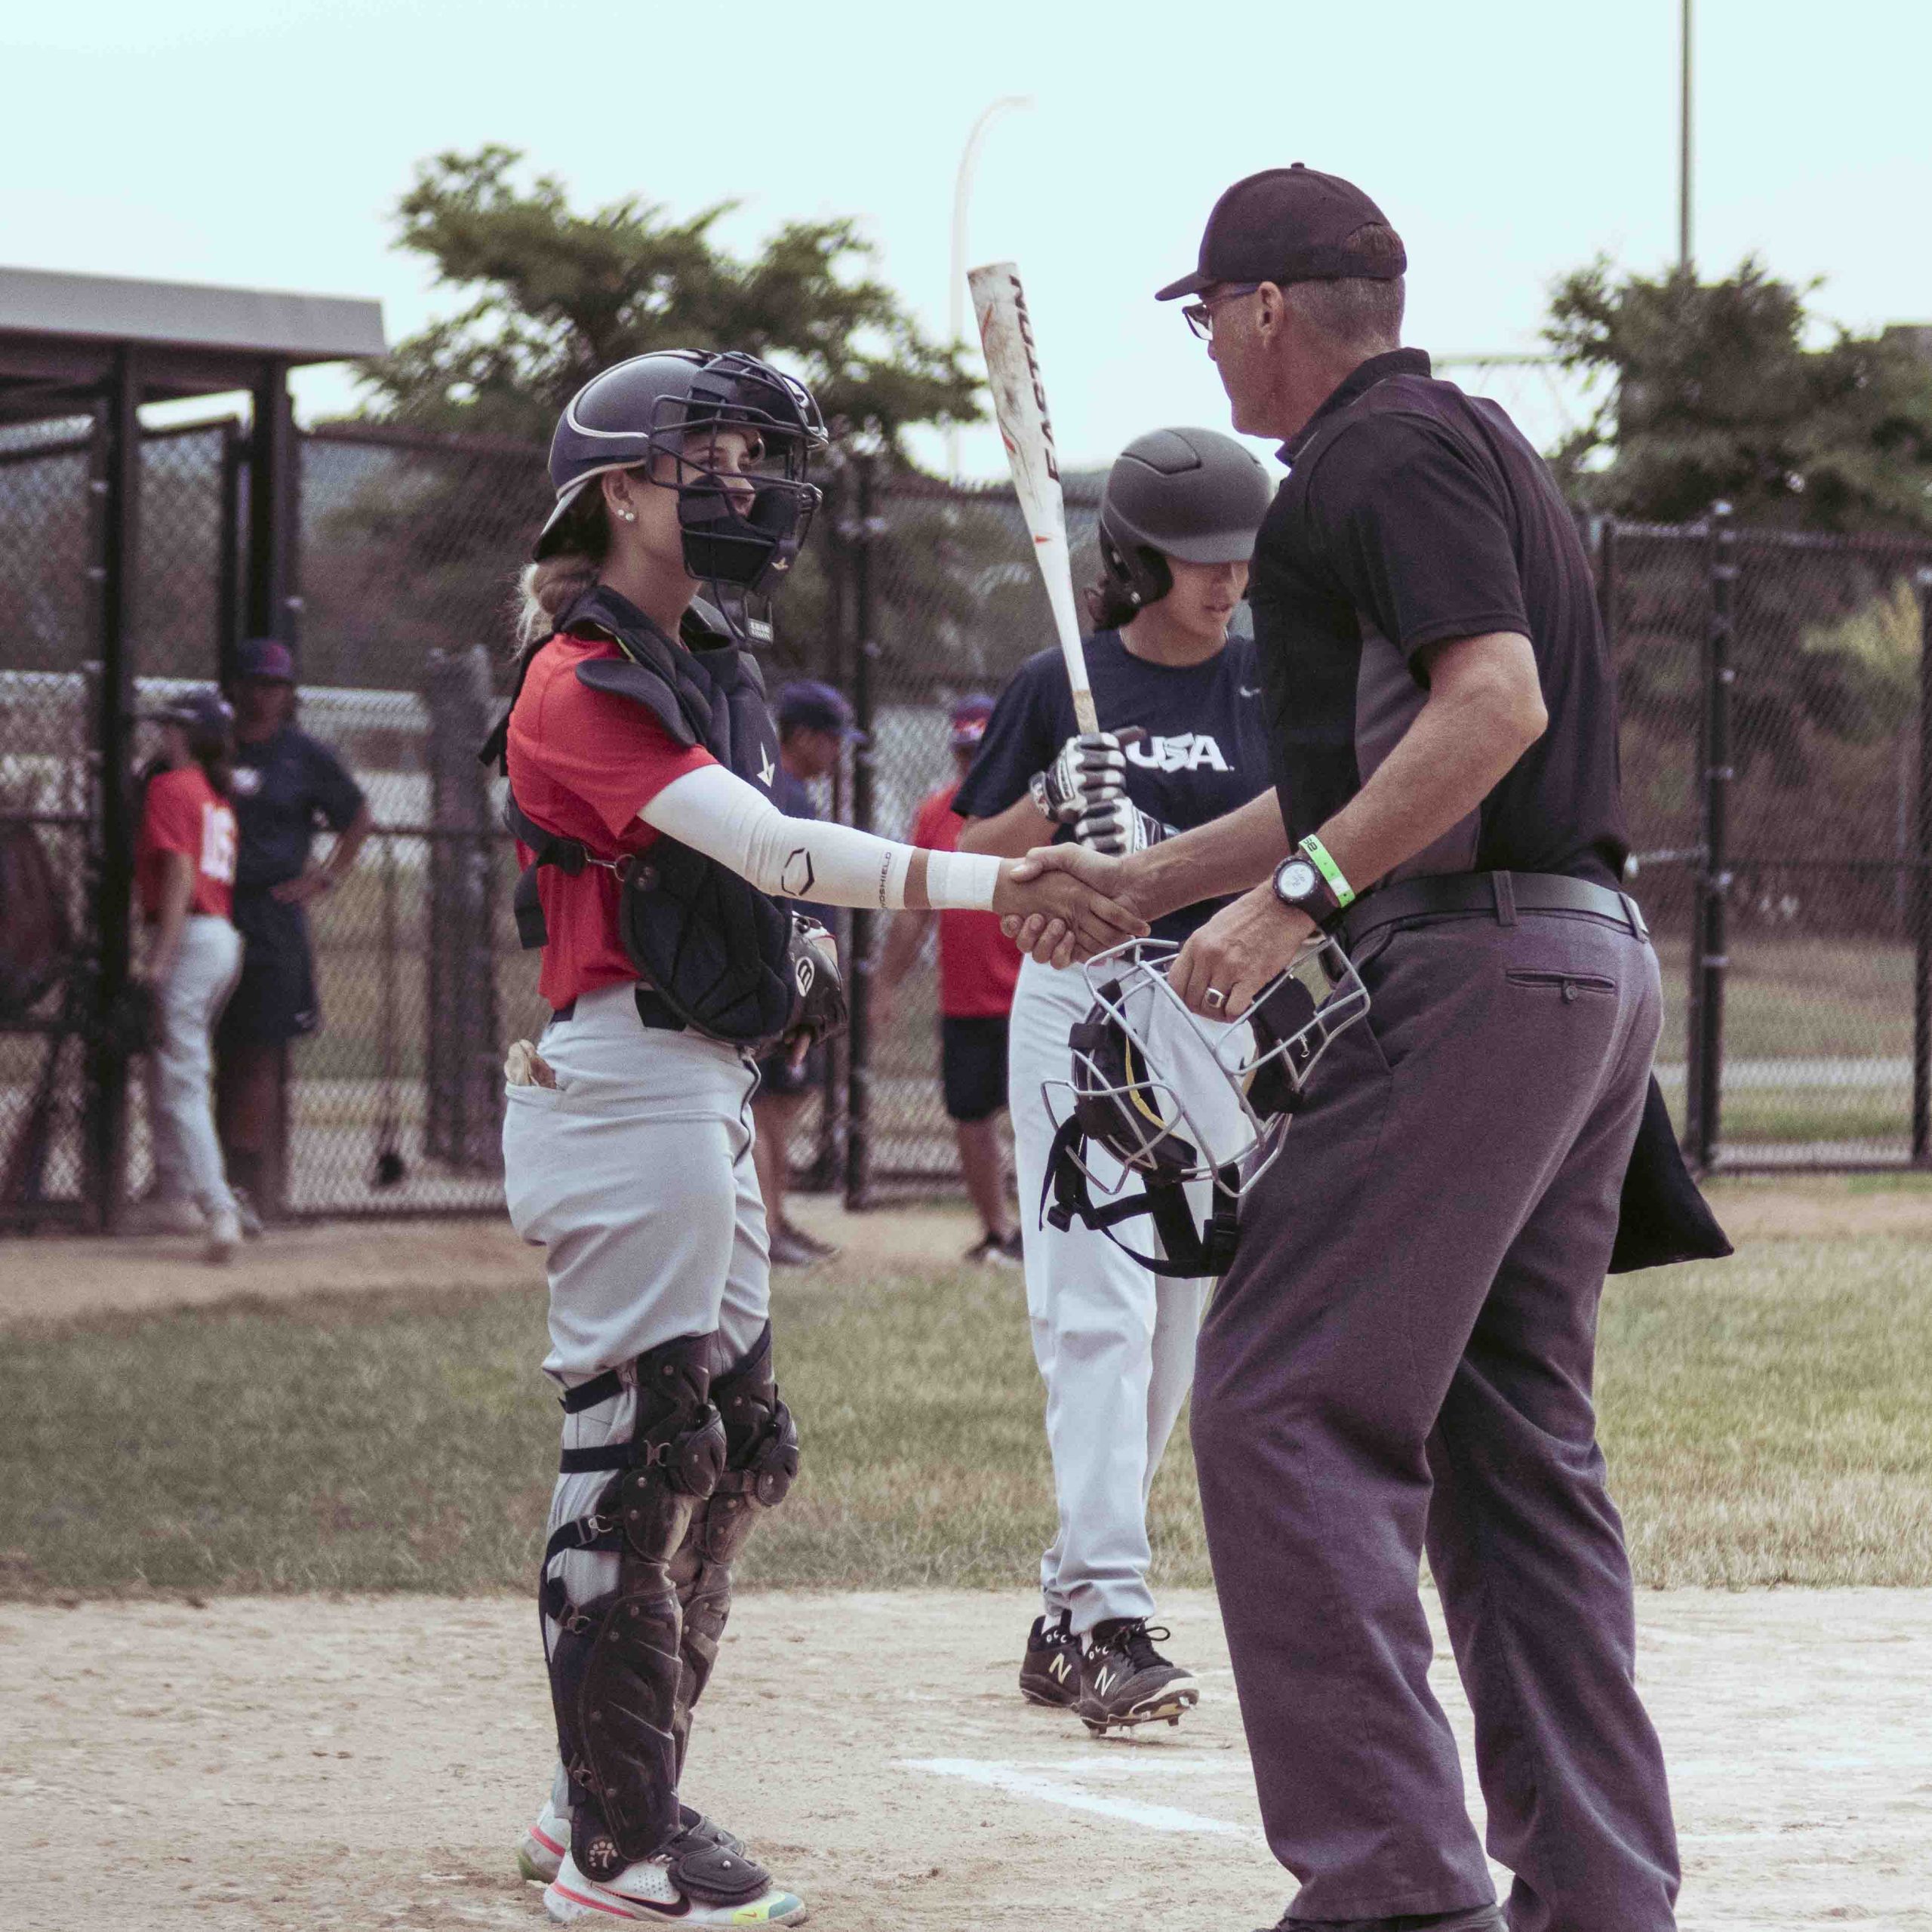 A catcher and umpire shake hands before a game of ball.